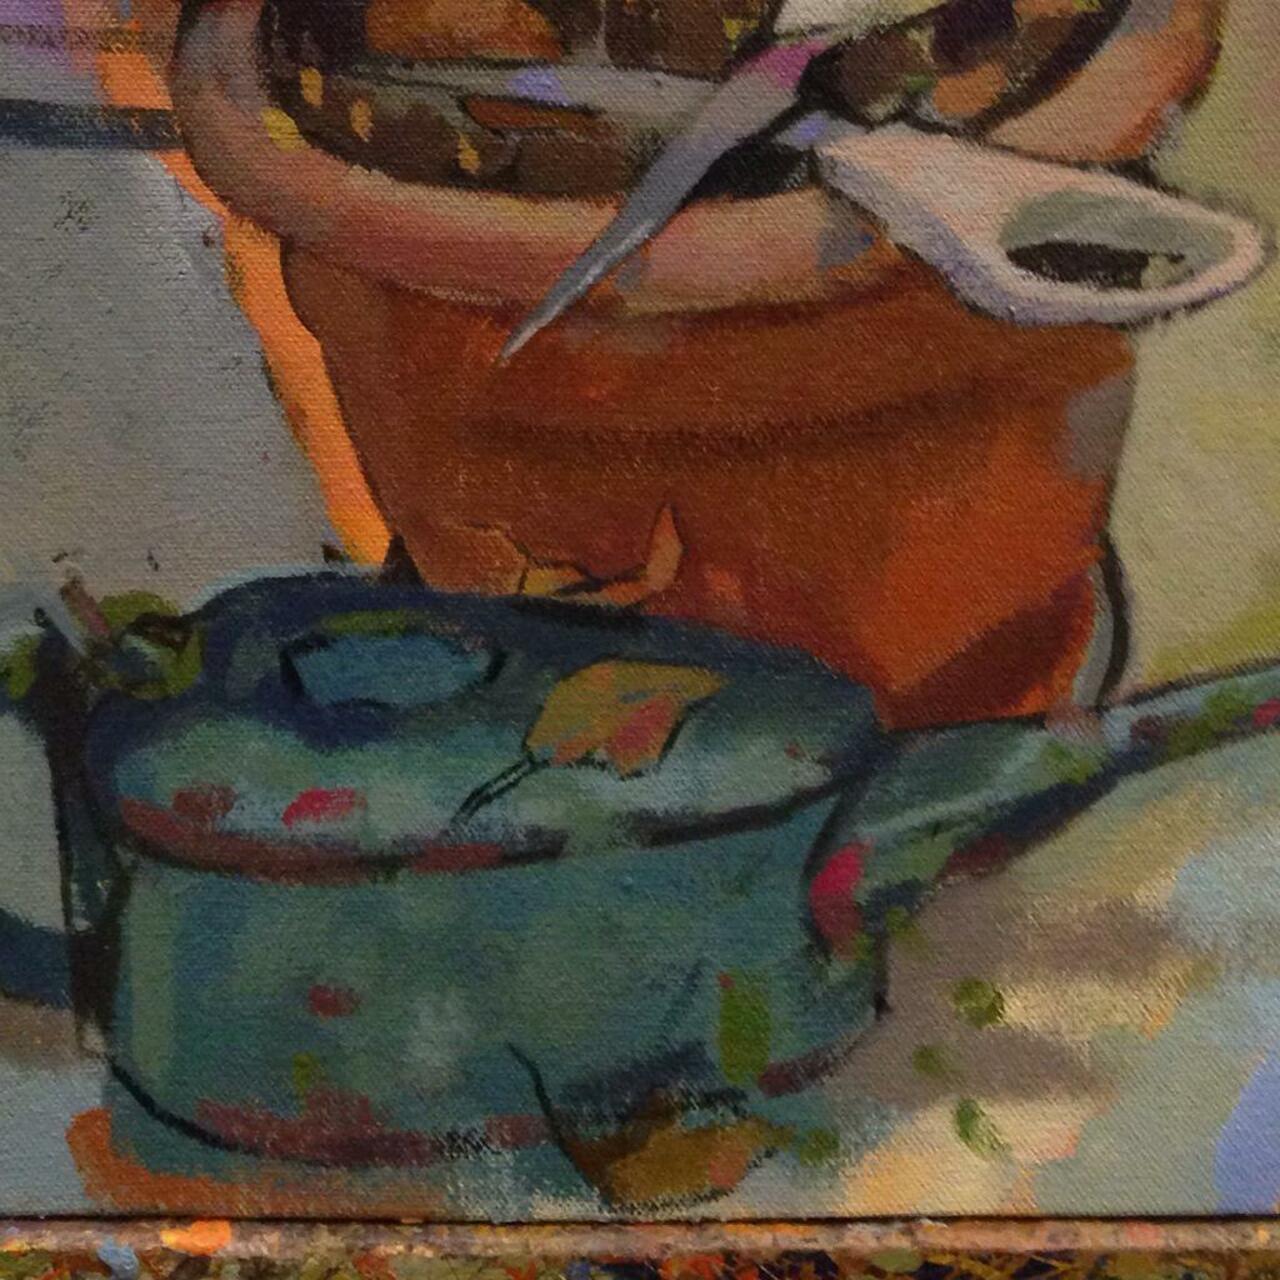 Crop of a recent still life. Oil lamp and scissors. #art #stilllife #painting #colour http://t.co/mHAeCWCPoS